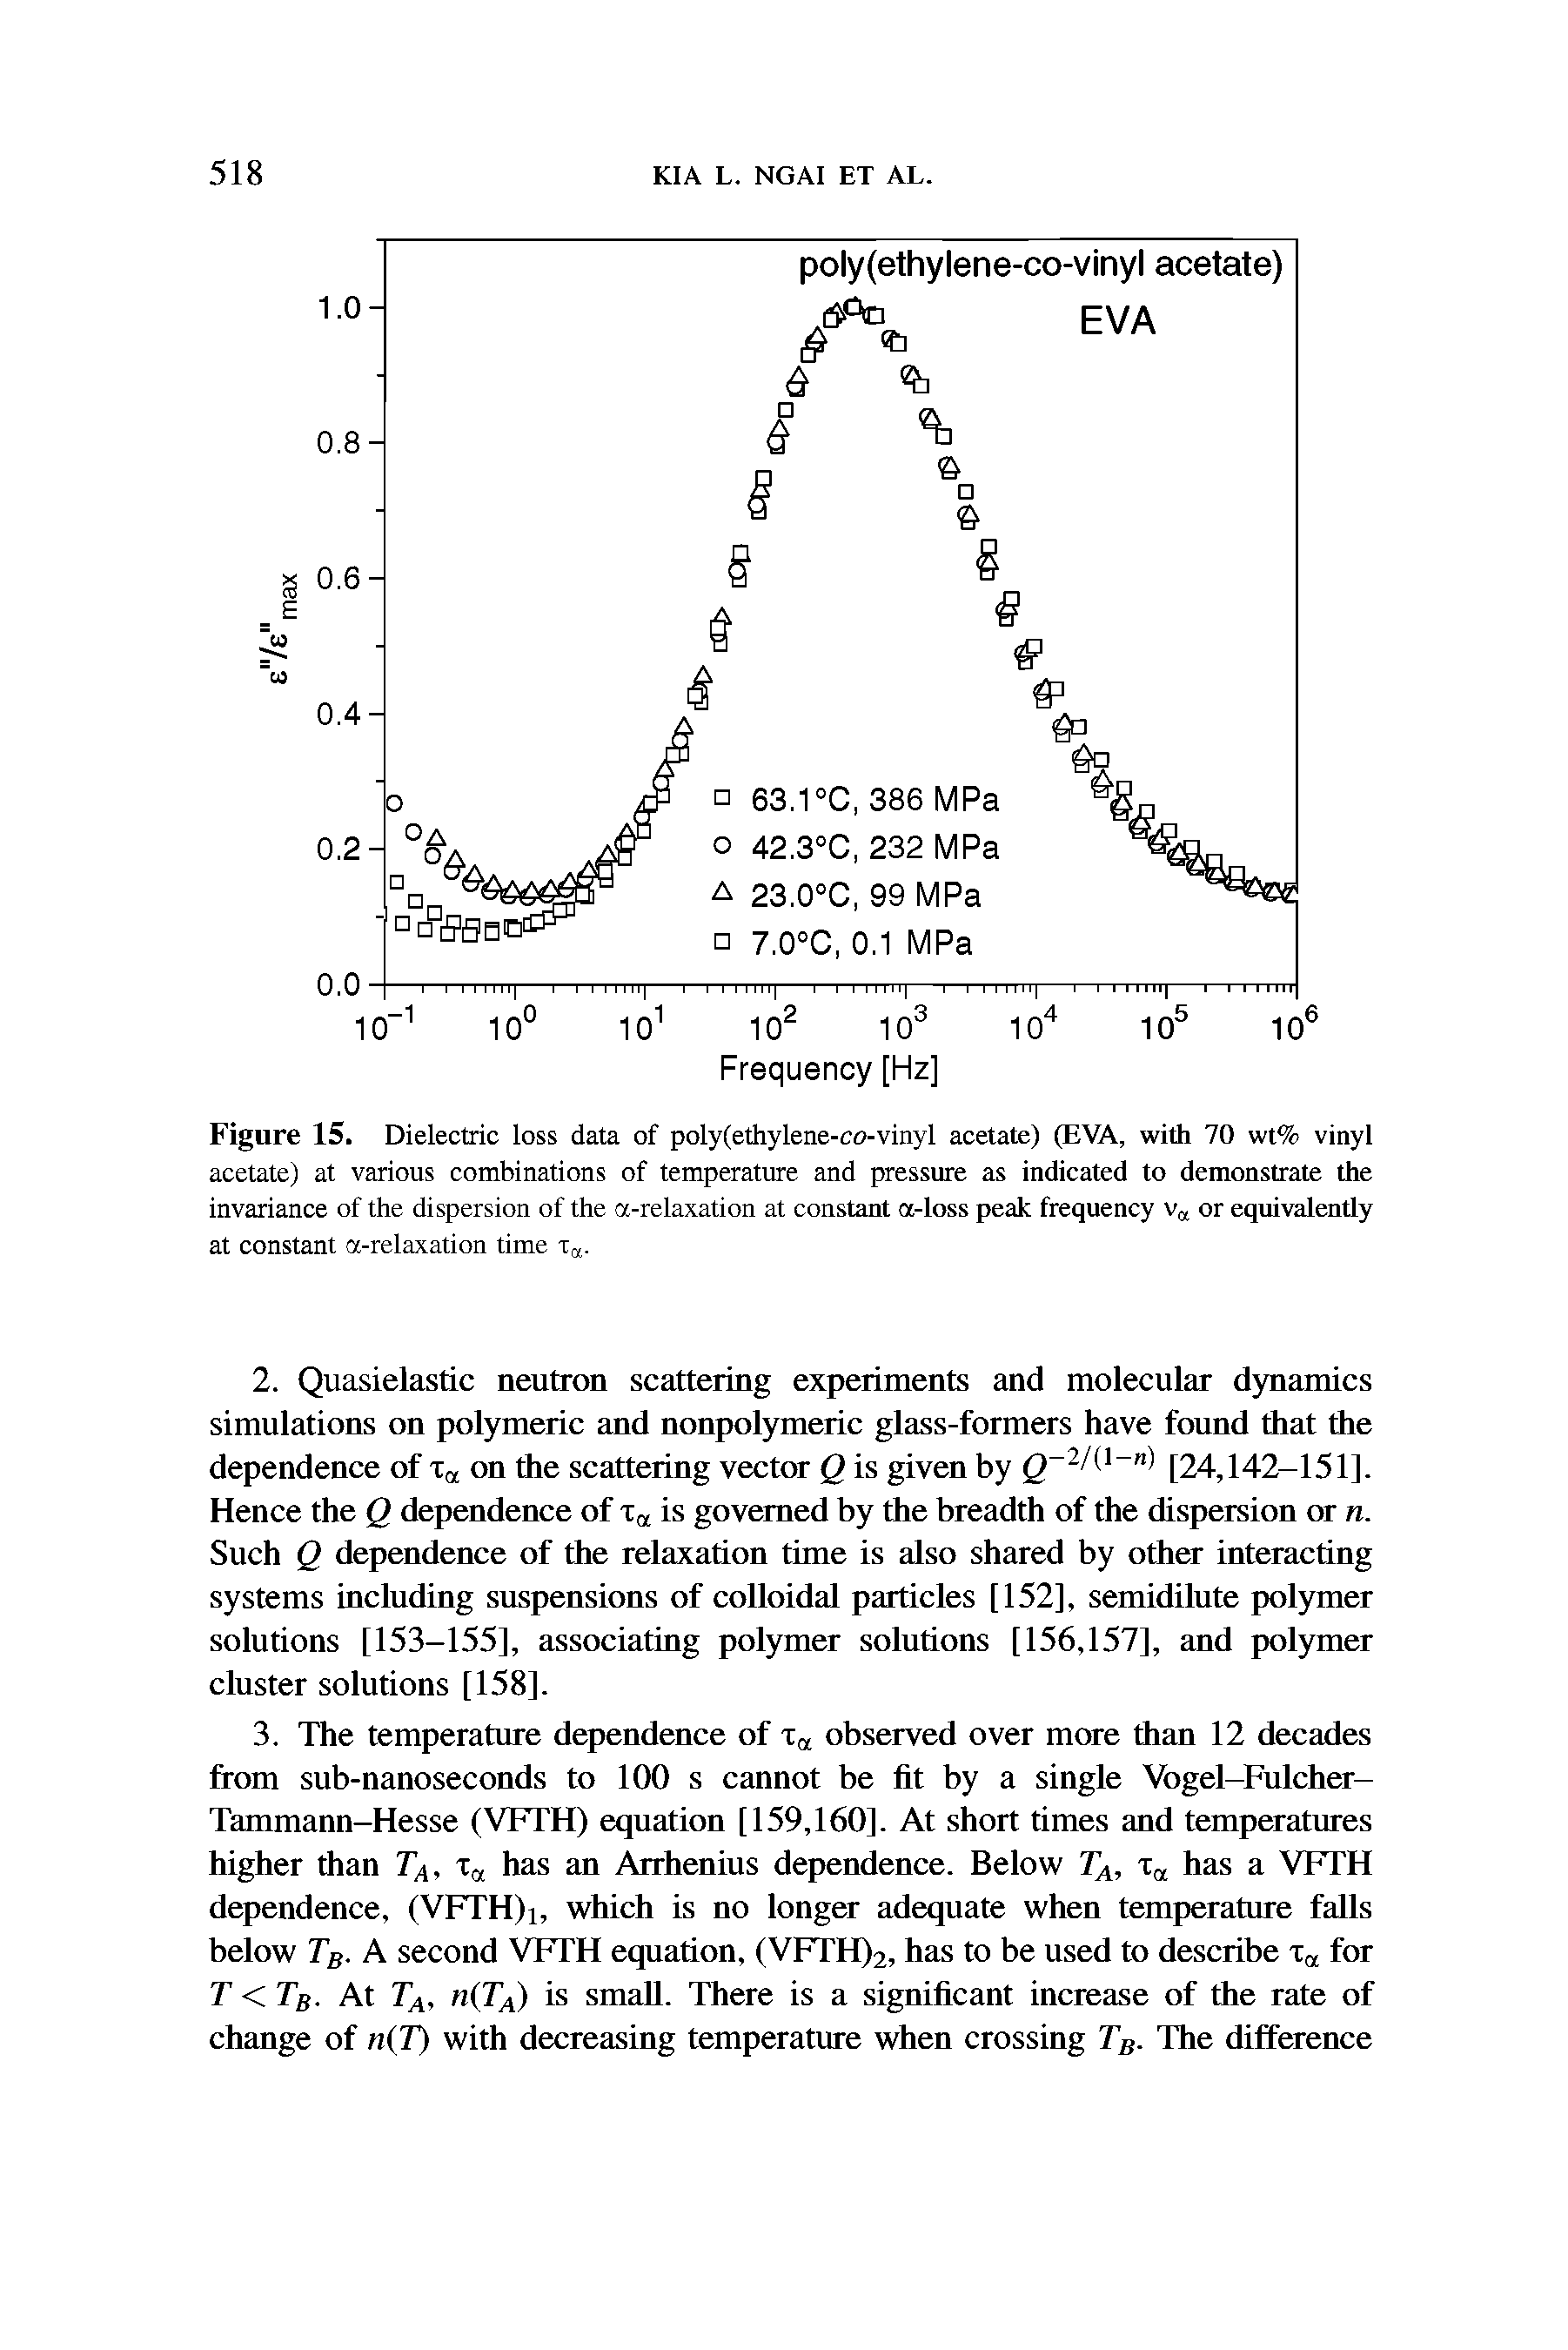 Figure 15. Dielectric loss data of poly(ethylene-co-vinyl acetate) (EVA, with 70 wt% vinyl acetate) at various combinations of temperature and pressure as indicated to demonstrate the invariance of the dispersion of the a-relaxation at constant a-loss peak frequency va or equivalently at constant a-relaxation time tx.